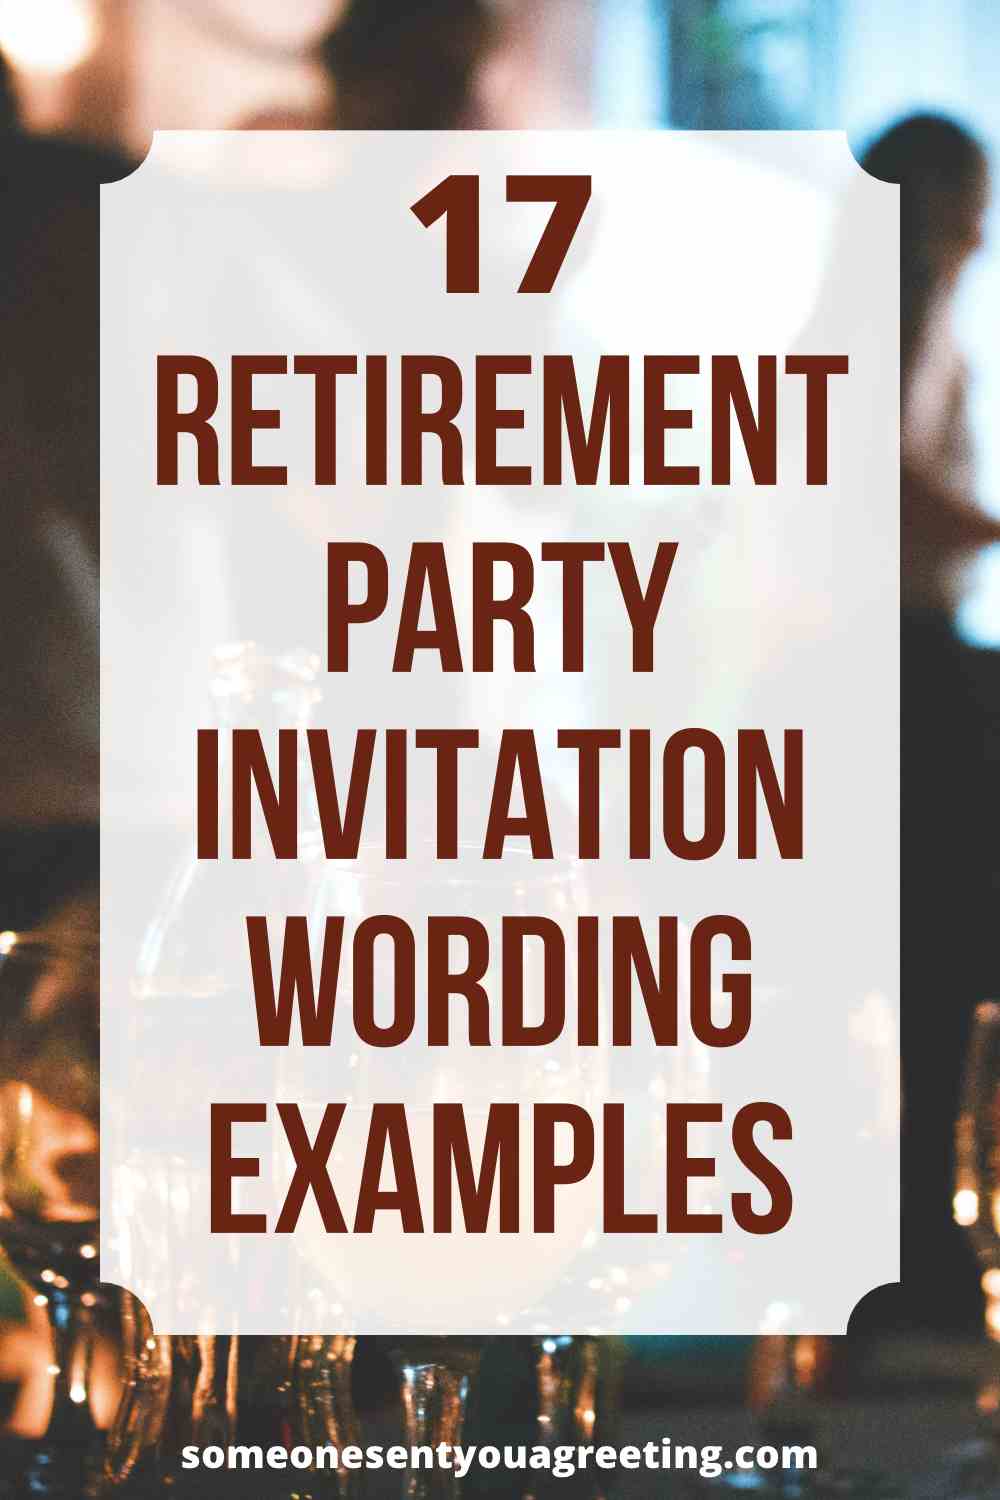 17 Retirement Party Invitation Wording Examples - Someone Sent You A  Greeting